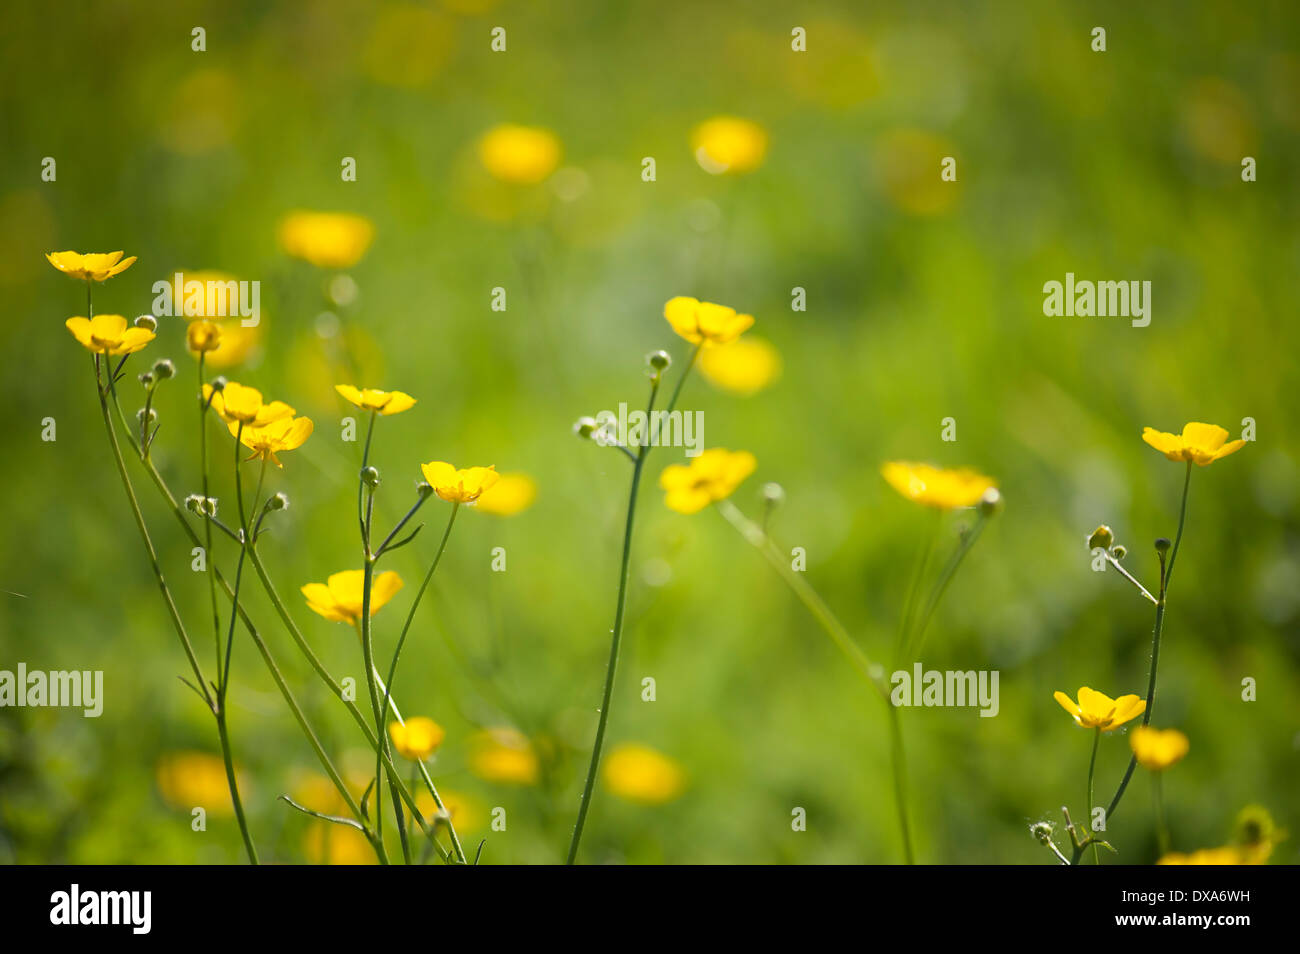 Buttercup, Meadow buttercup, Ranunculus acris growing in a grass meadow, several stems in sunlight. Stock Photo